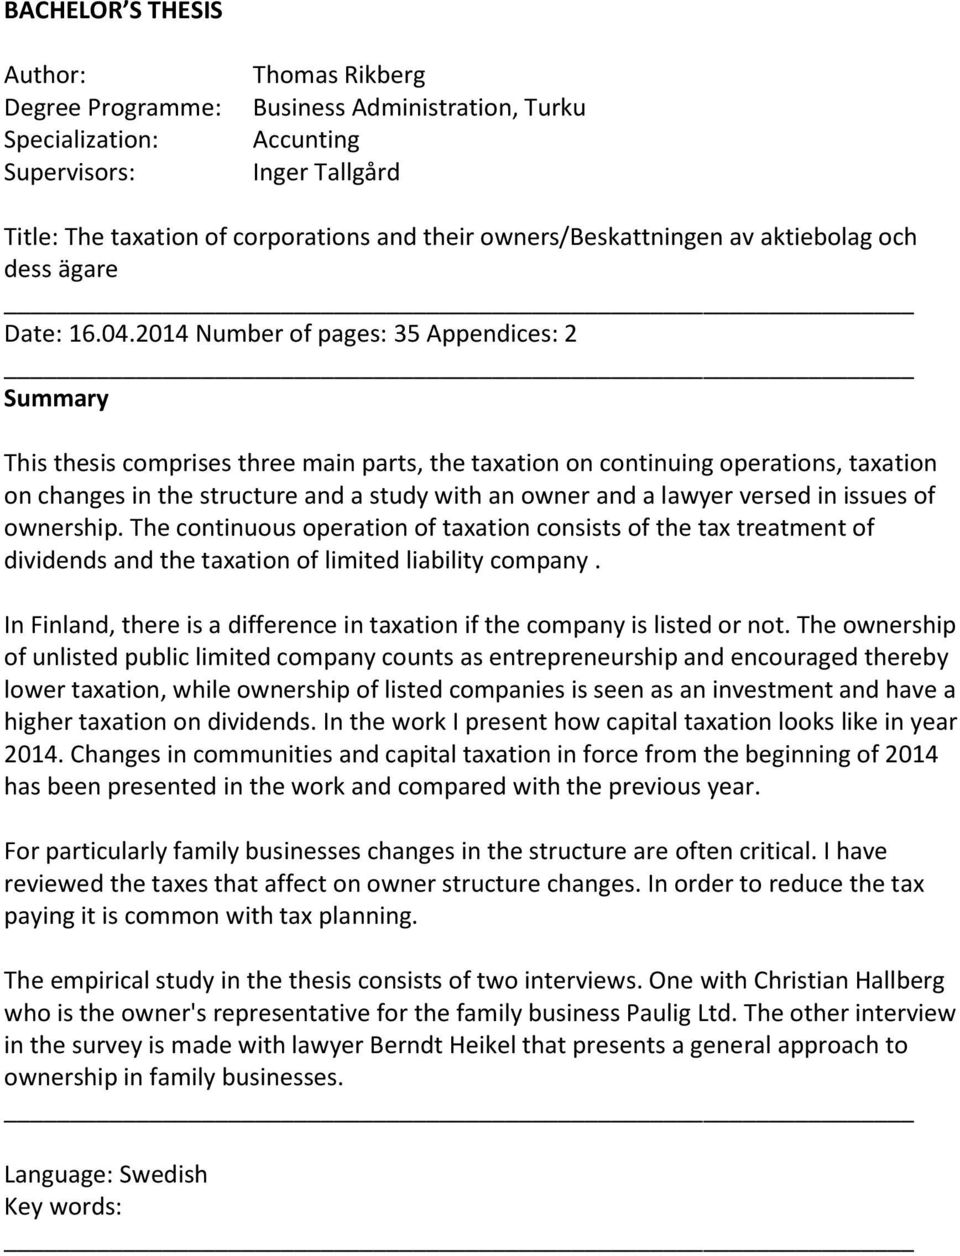 2014 Number of pages: 35 Appendices: 2 Summary This thesis comprises three main parts, the taxation on continuing operations, taxation on changes in the structure and a study with an owner and a